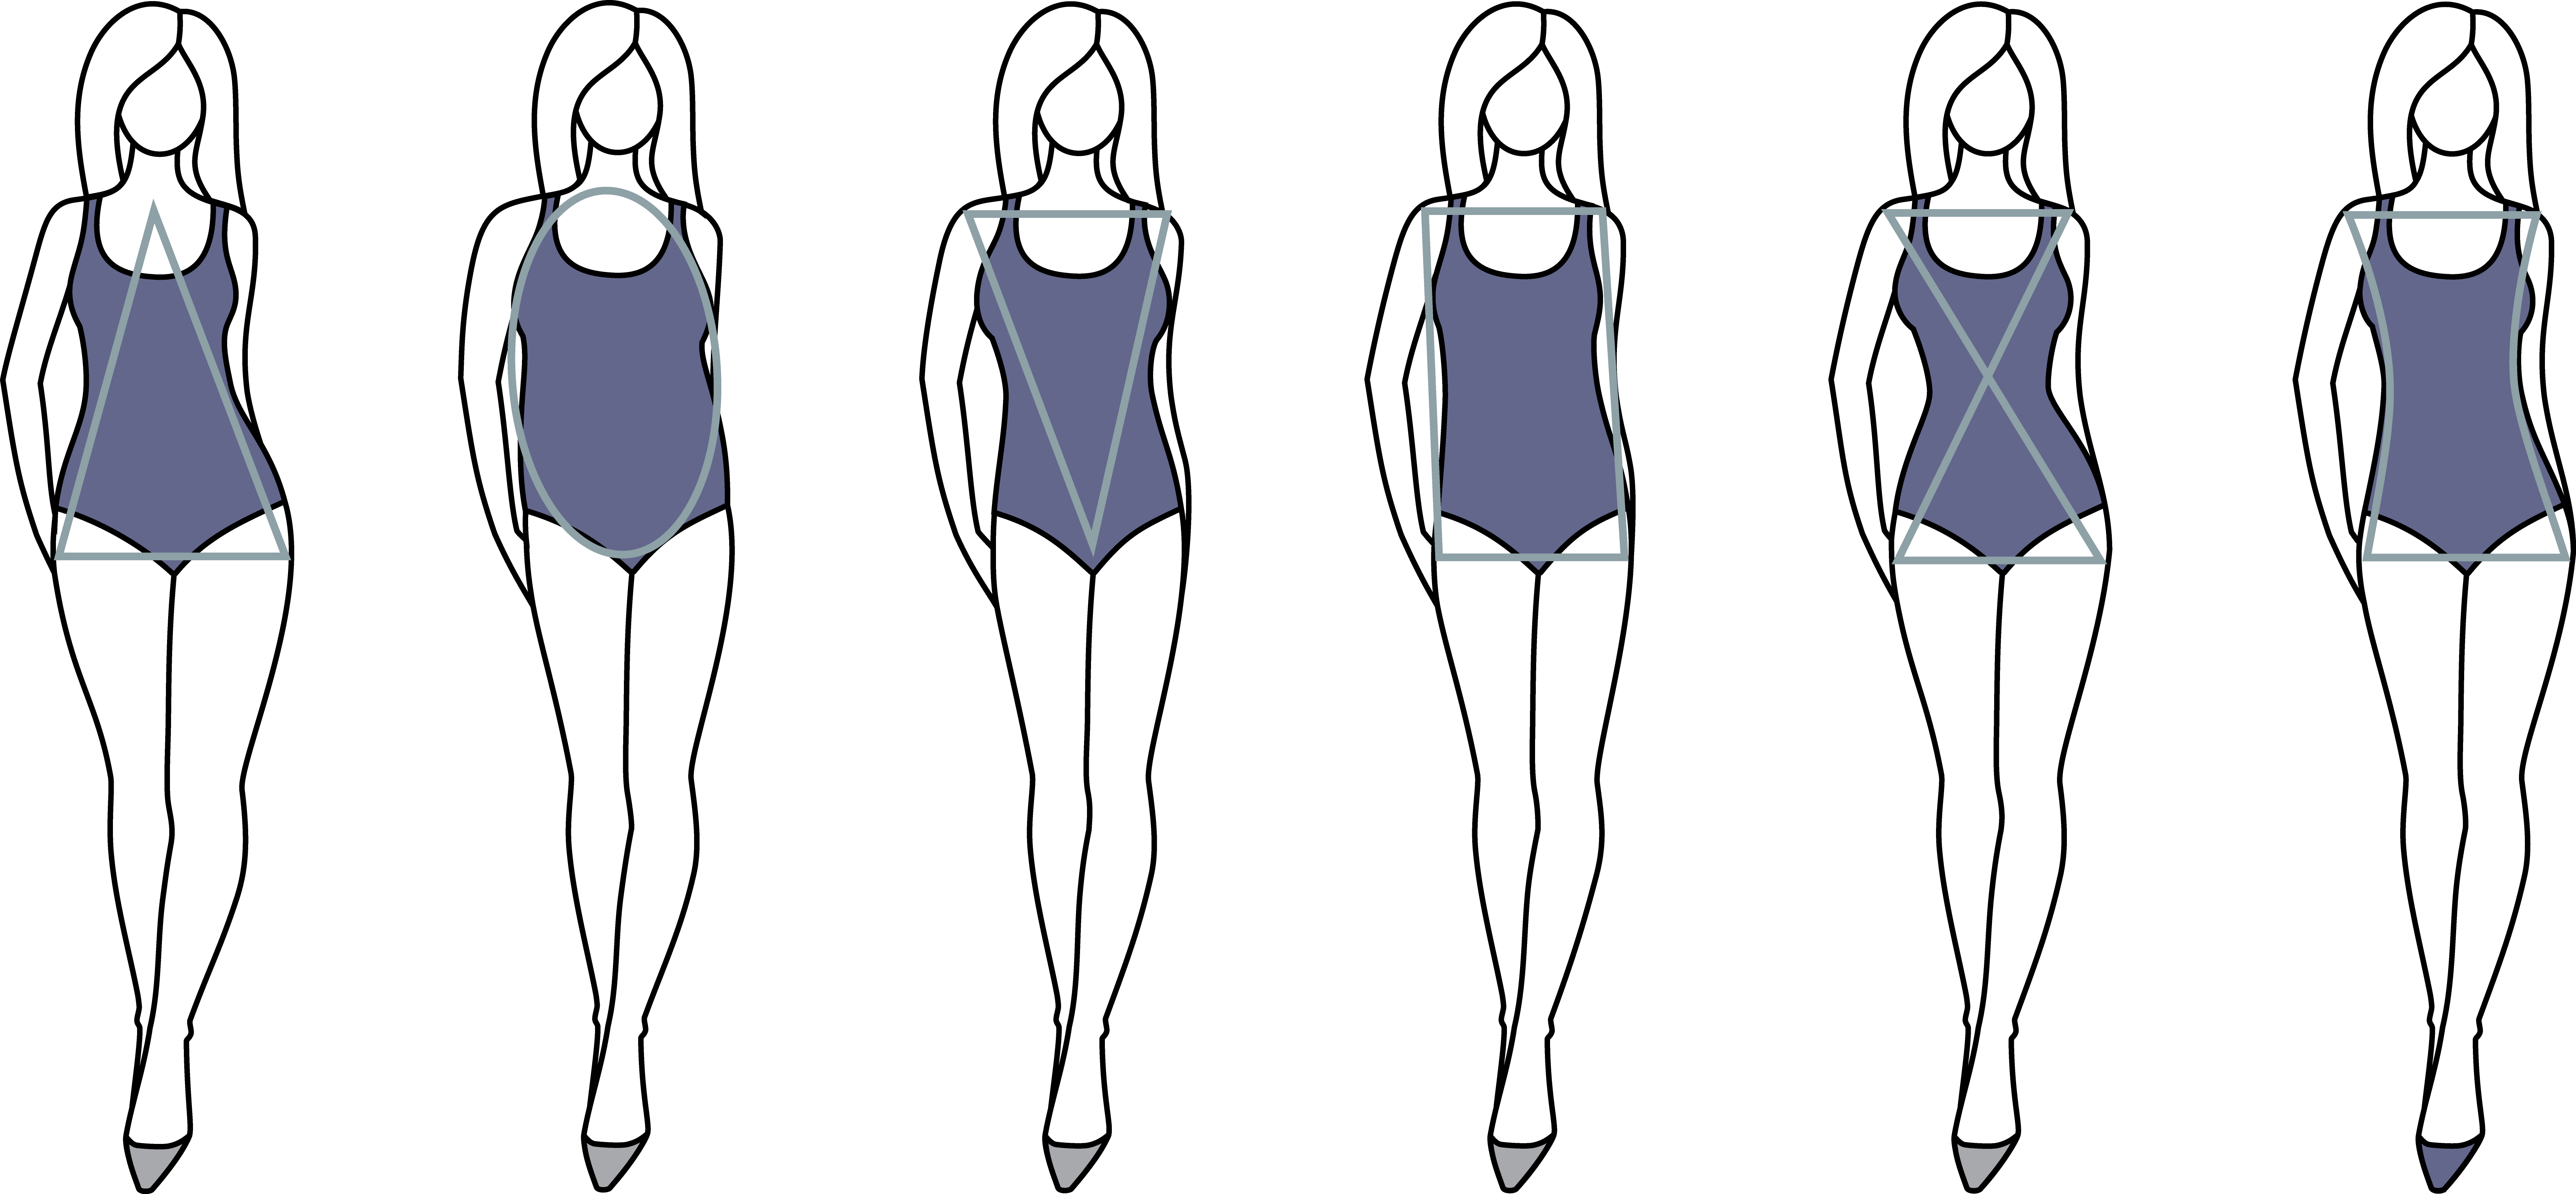 Find your Body Type